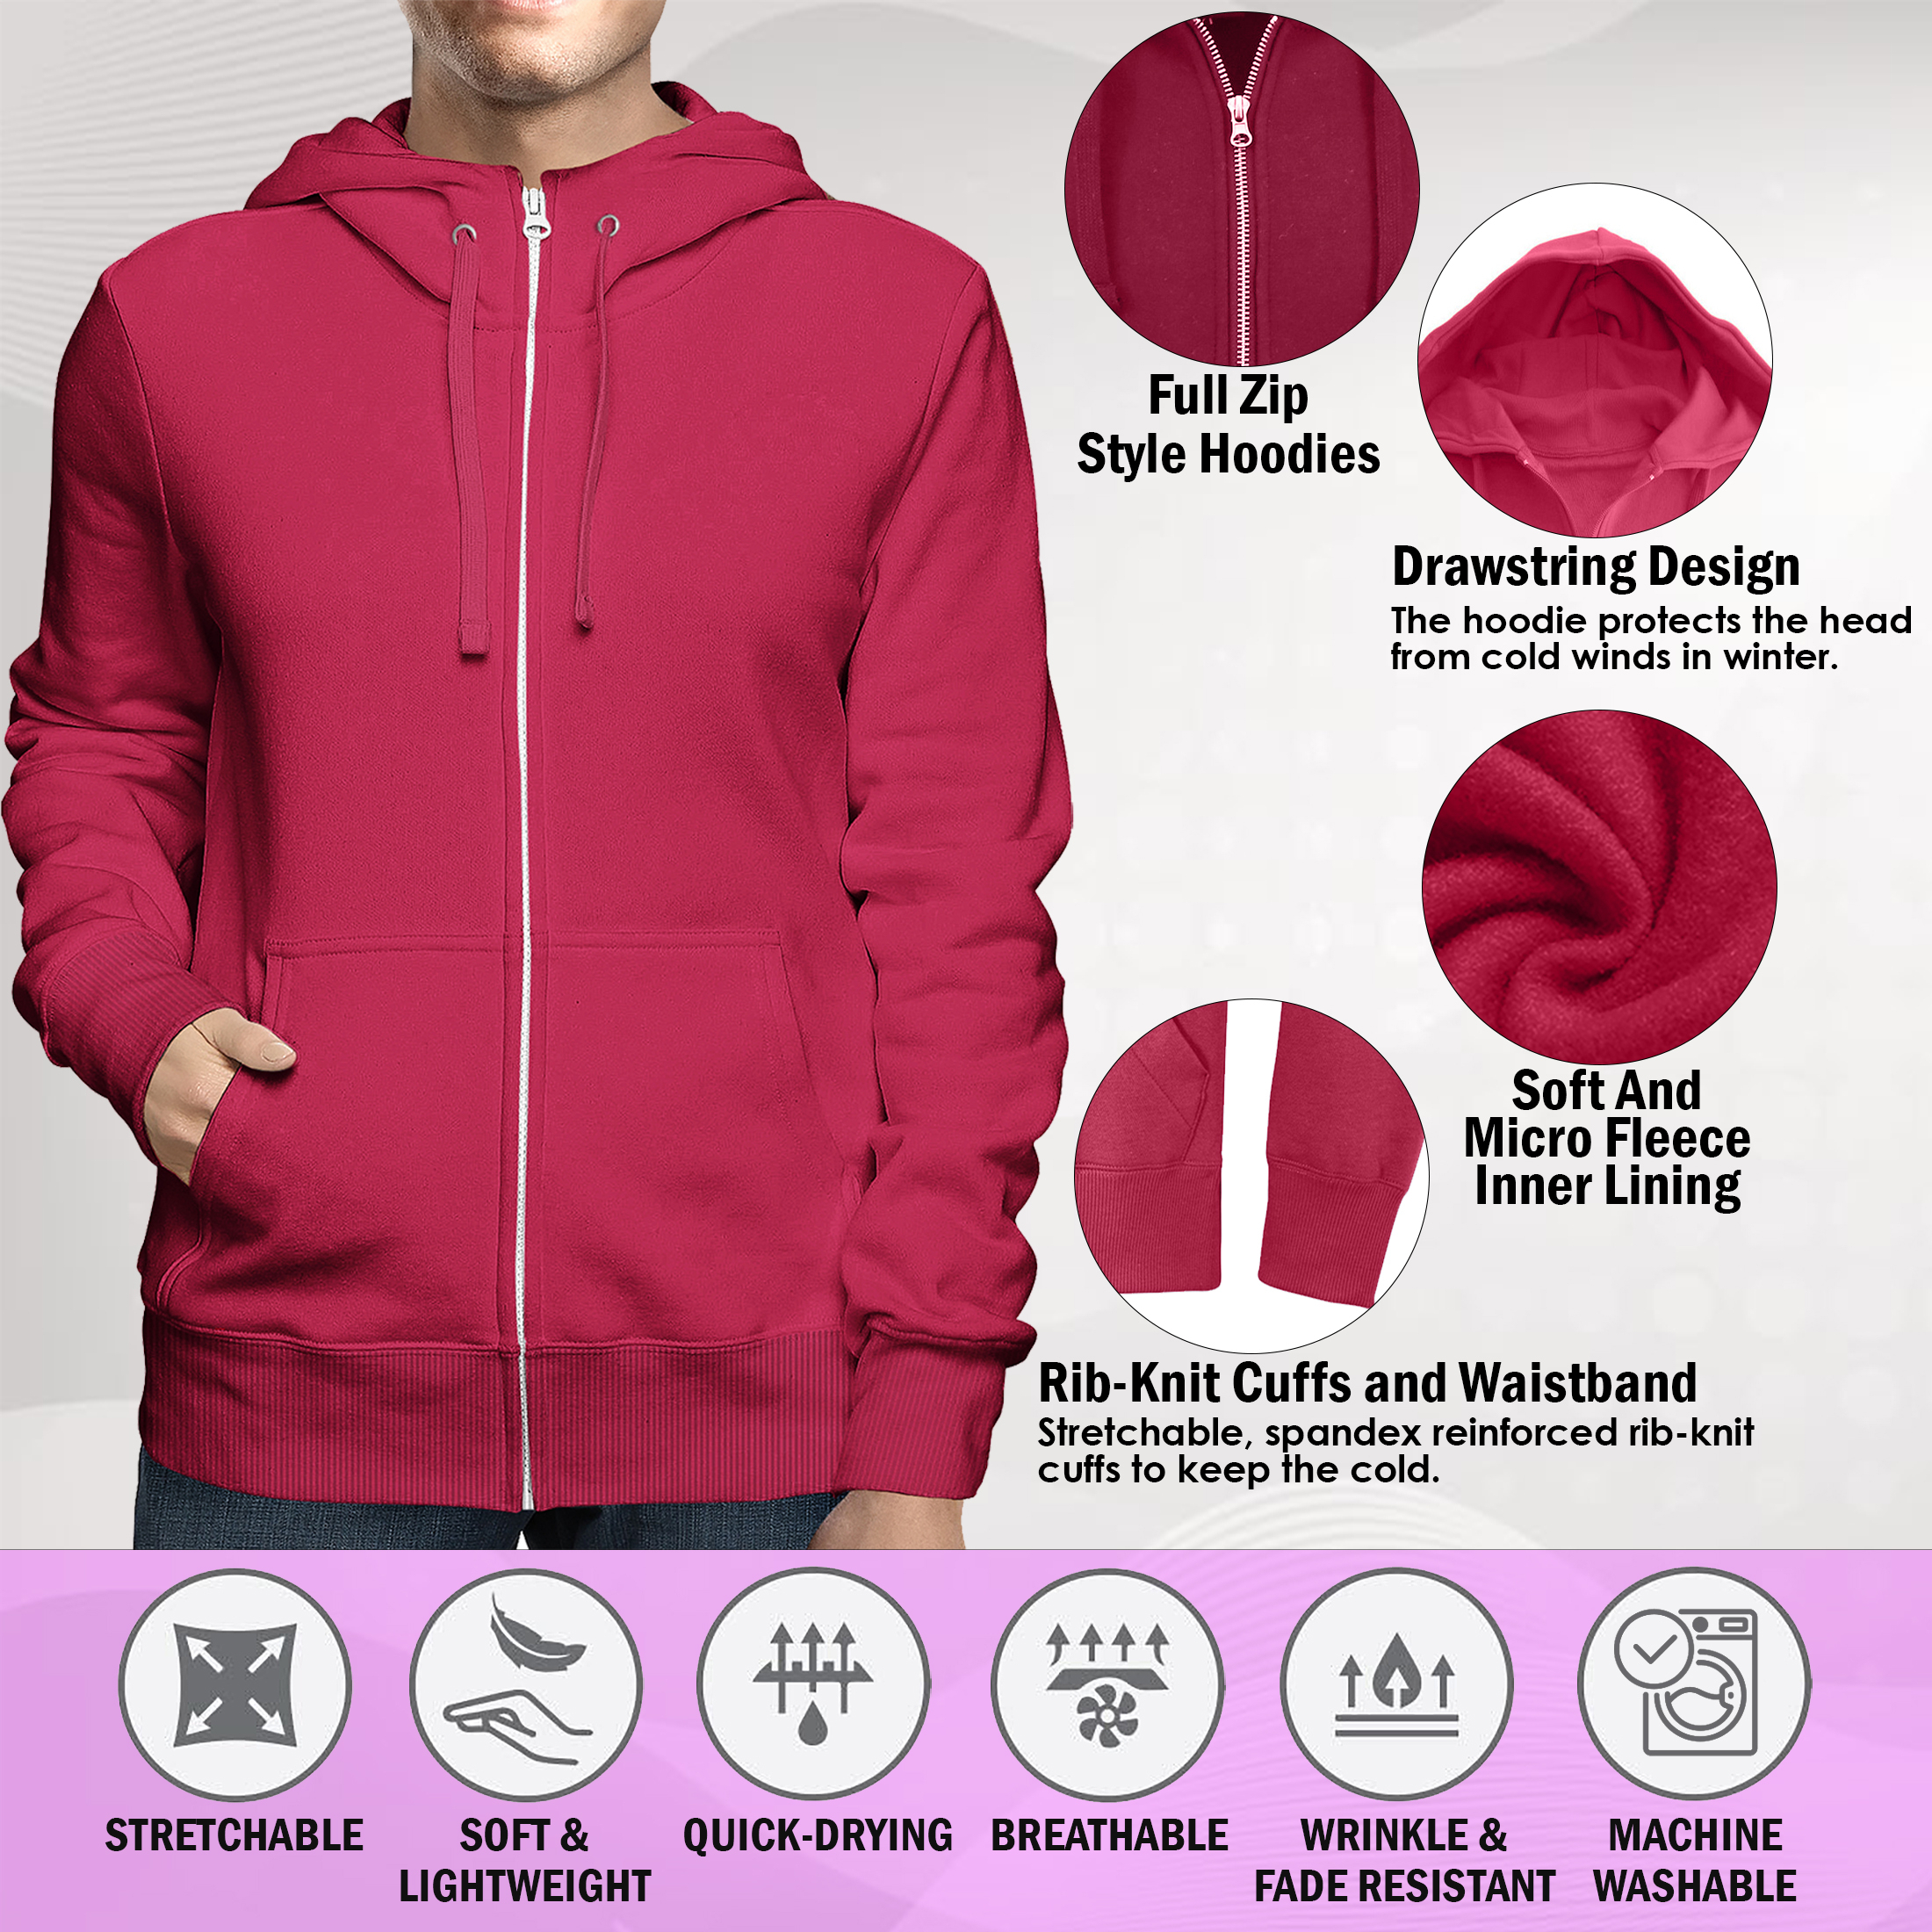 2-Pack: Men's Full Zip Up Fleece-Lined Hoodie Sweatshirt (Big & Tall Size Available) - Burgundy & Olive, Small